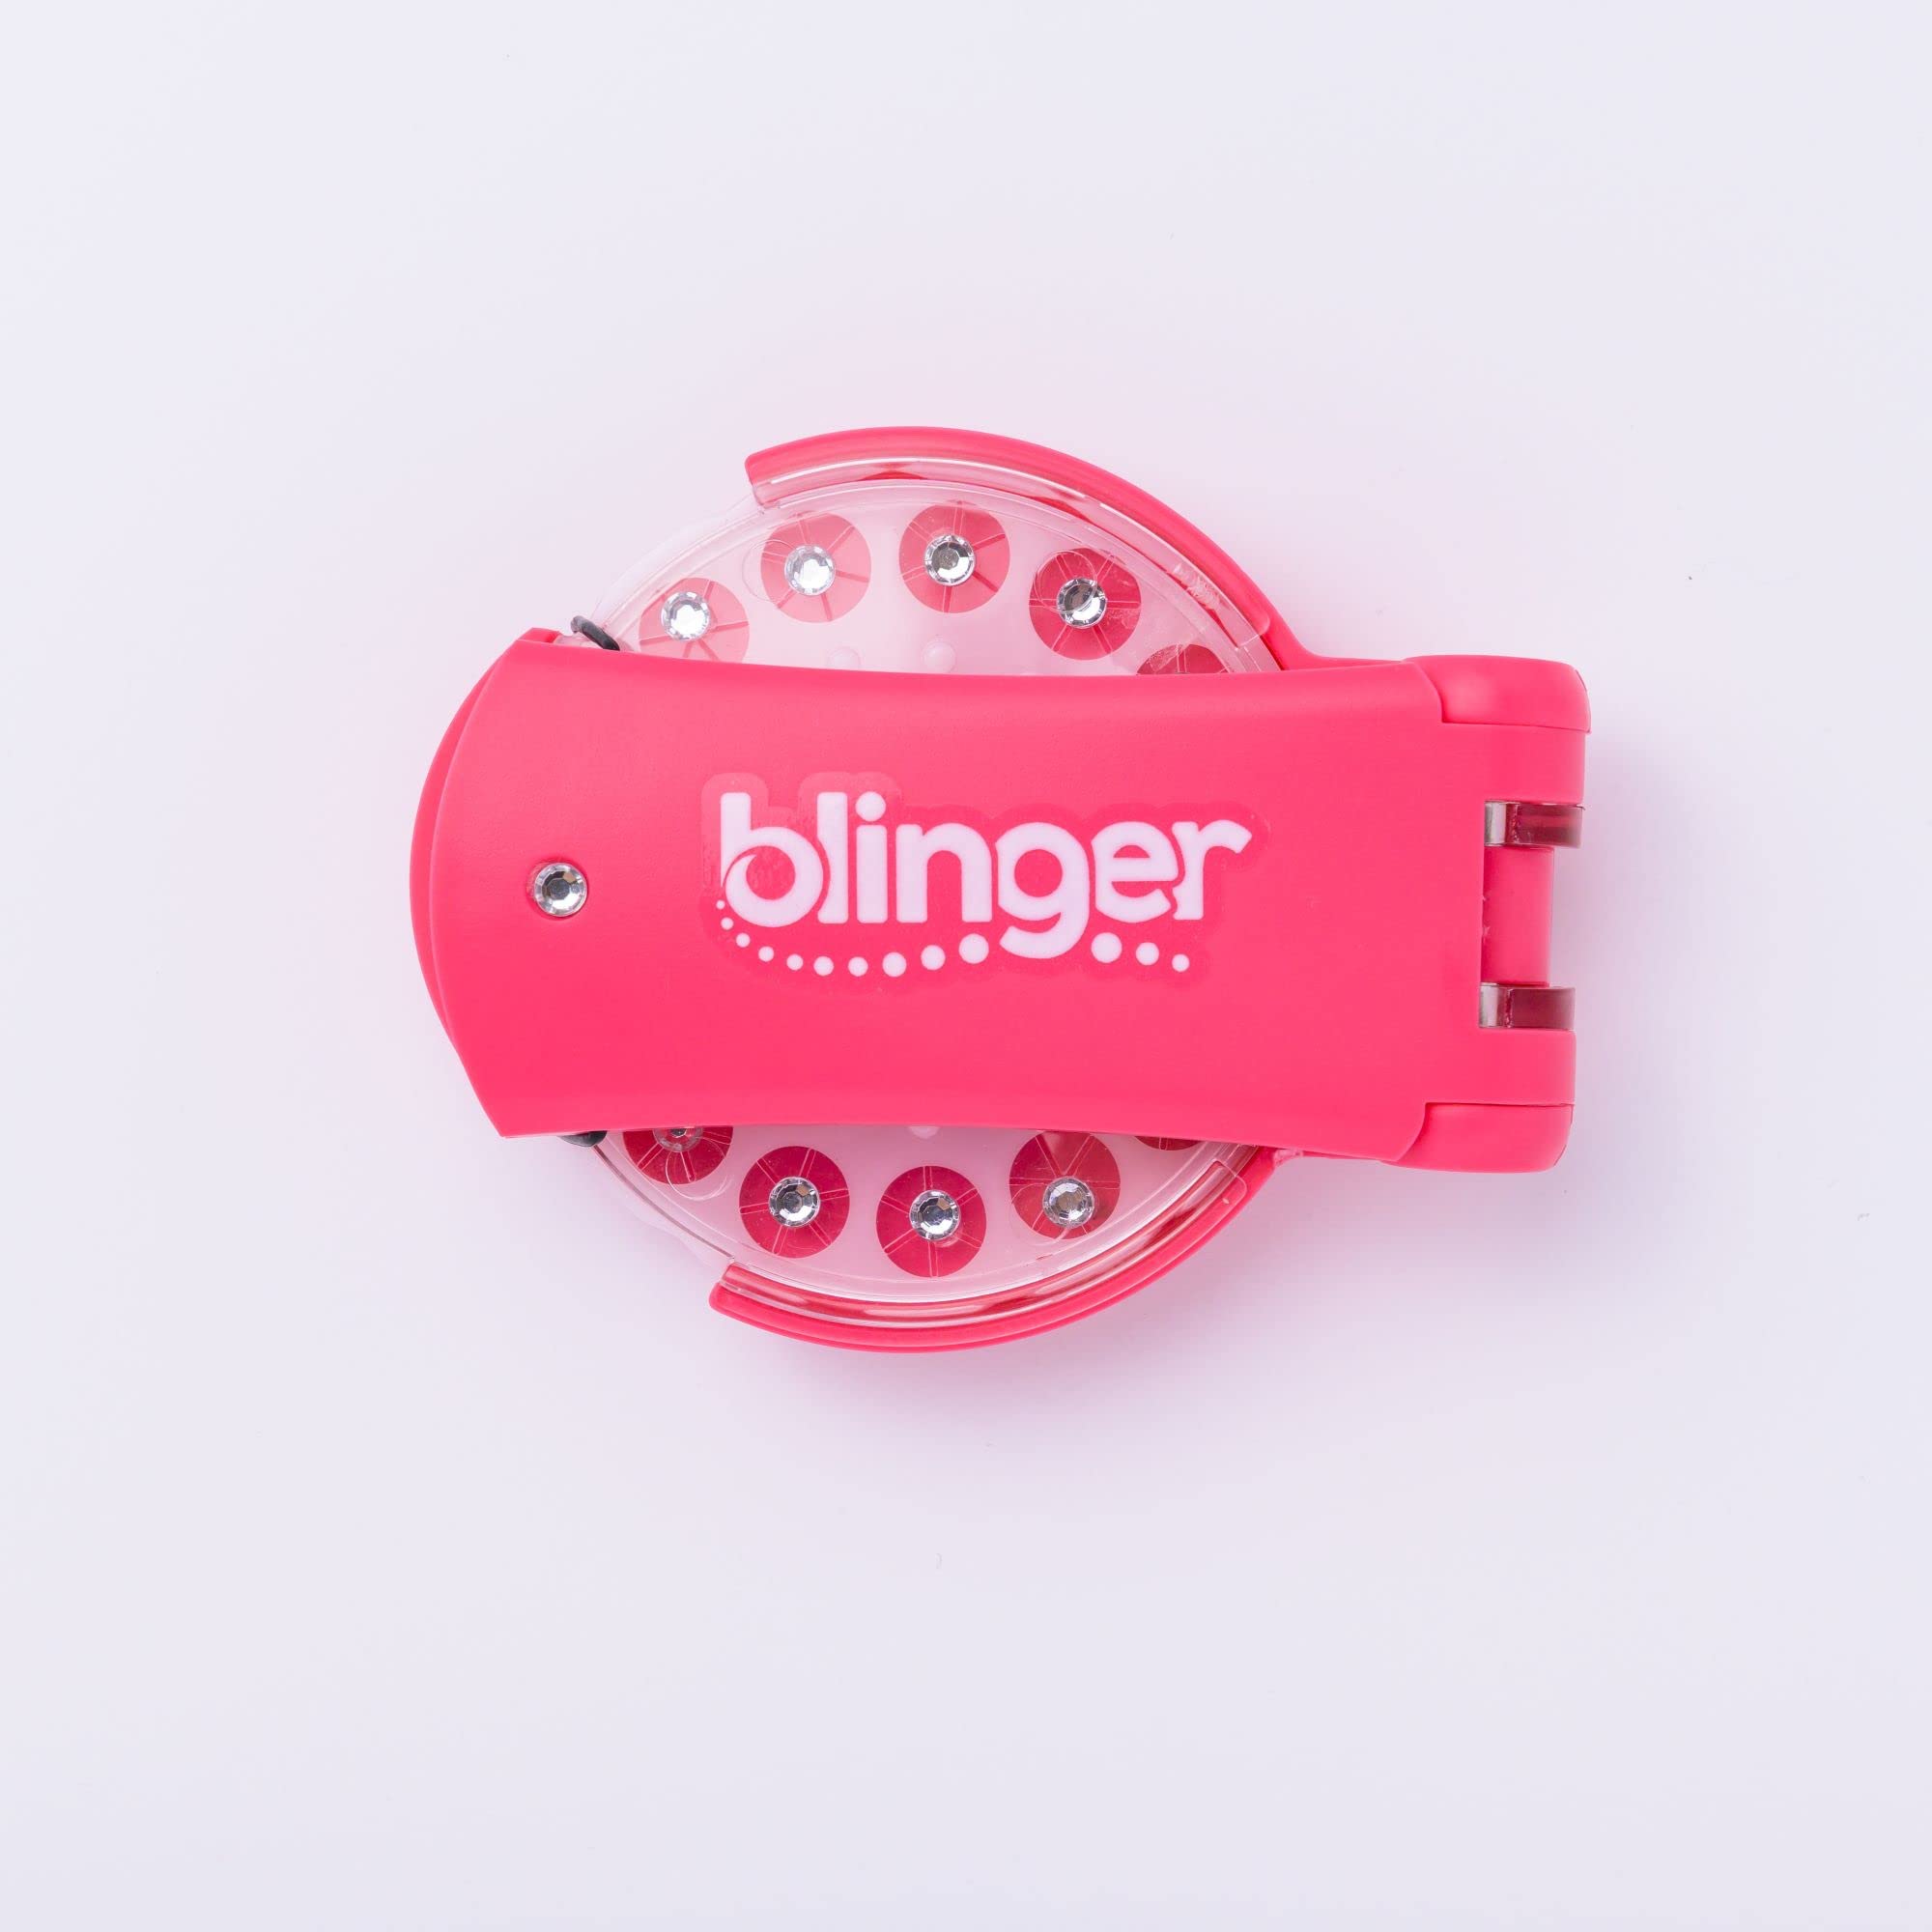 Blinger Dazzling Collection - Comes with Glam Styling Tool & 75 Gems - Load, Click, Bling! Hair, Fashion, Anything!